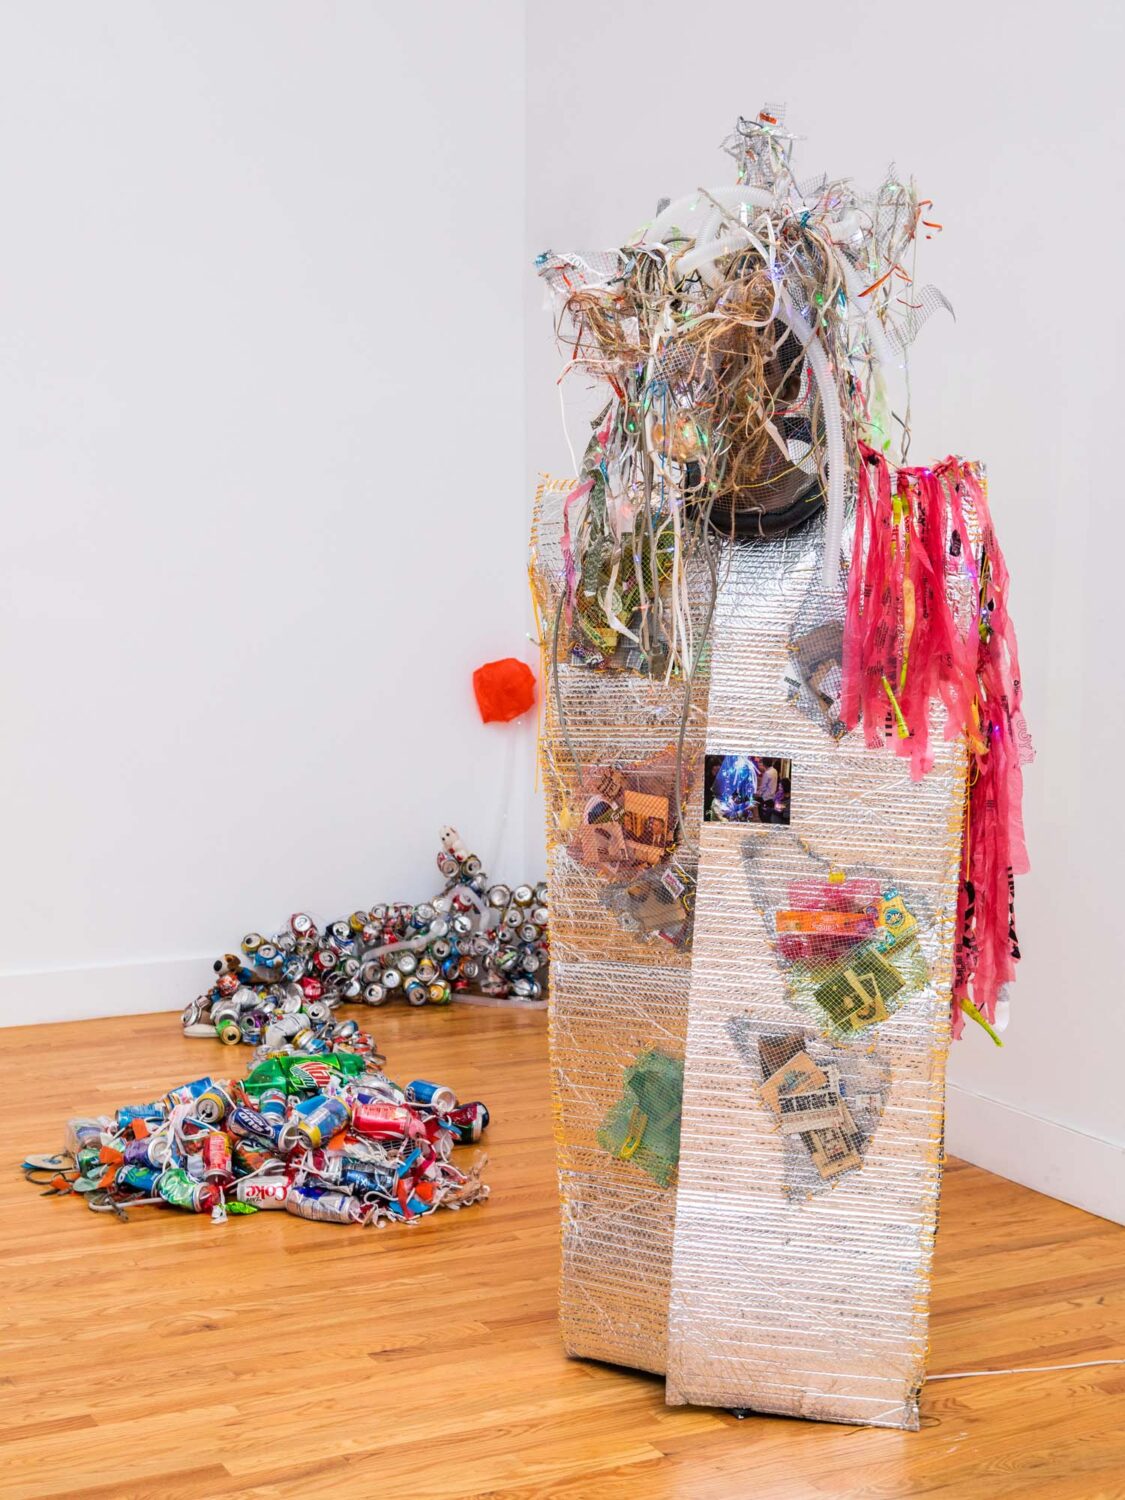 thumbnail of Custom made with LED lights, discarded refuse collected daily, the packaging of snacks consumed; old recycle clothing and shredded aluminum cans by Chin Chih Yang titled Broken Mind.